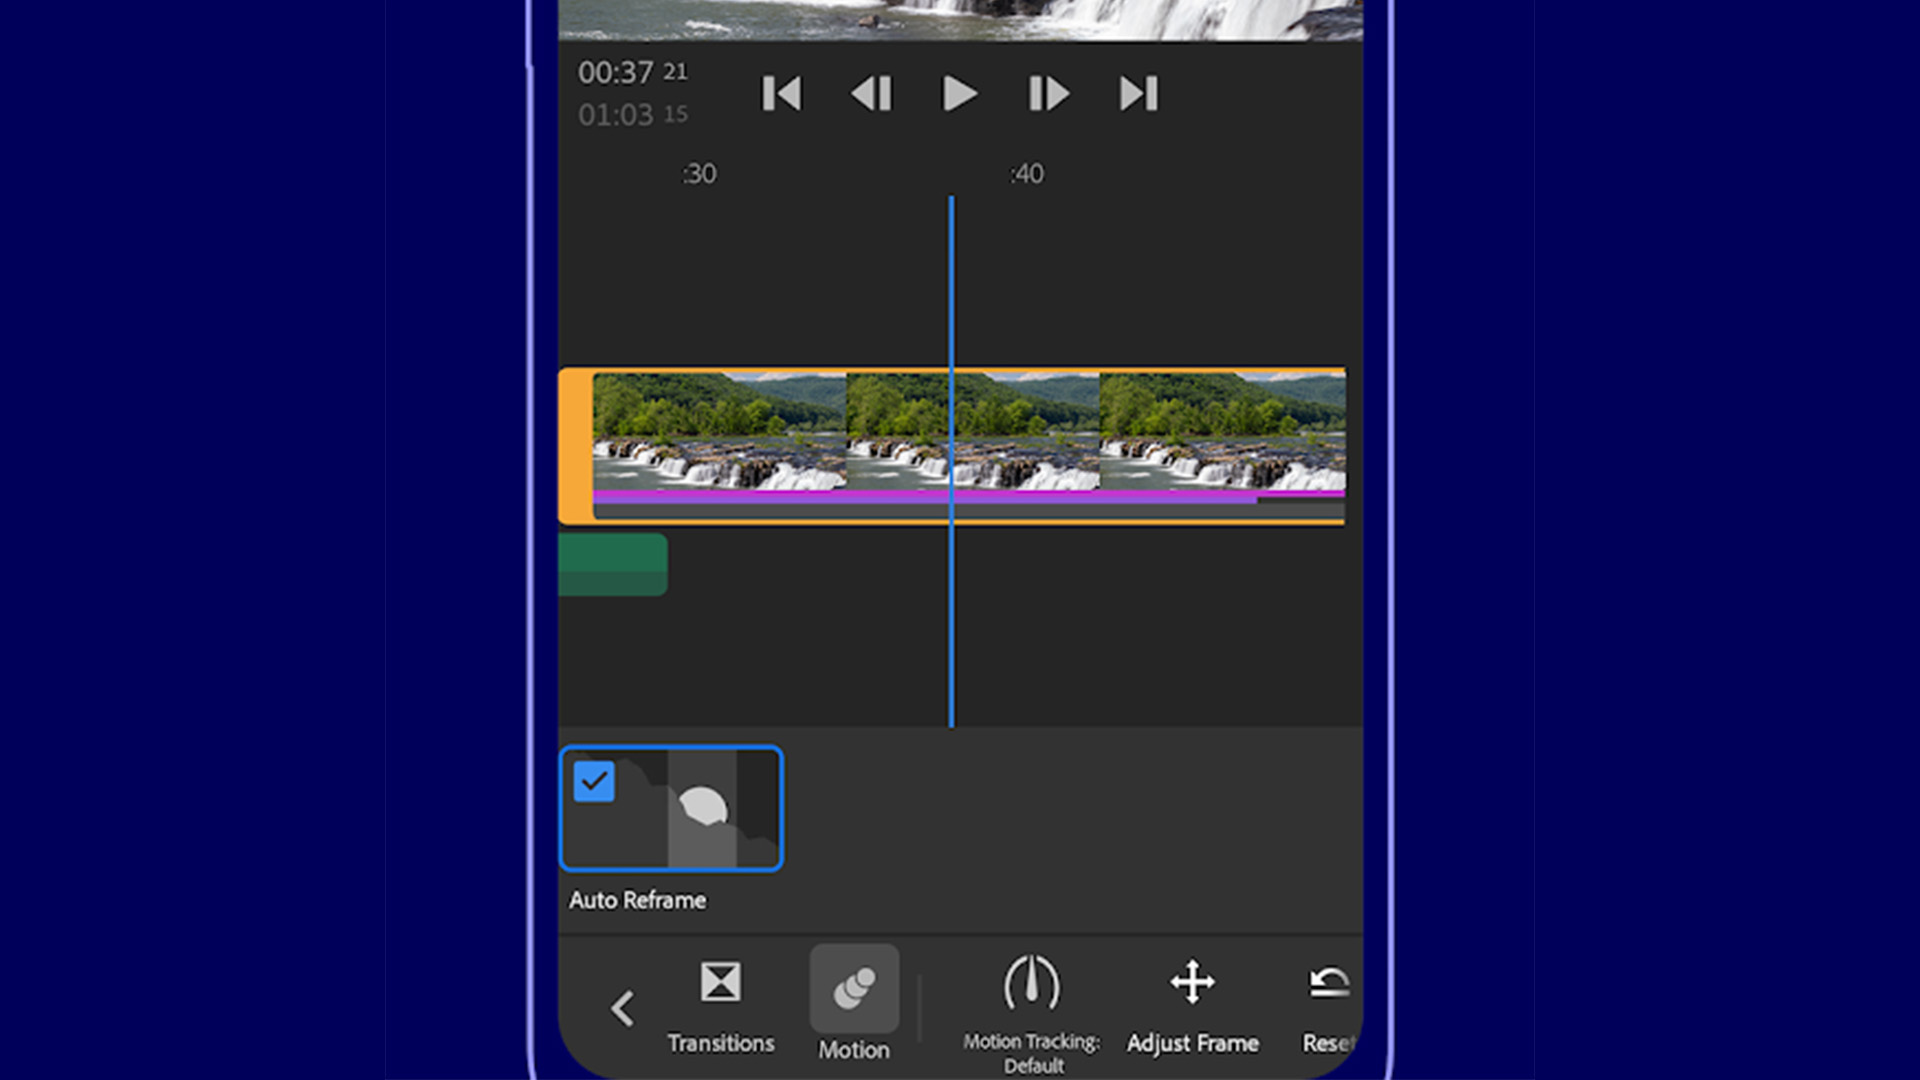 One of the best video editor apps for Android